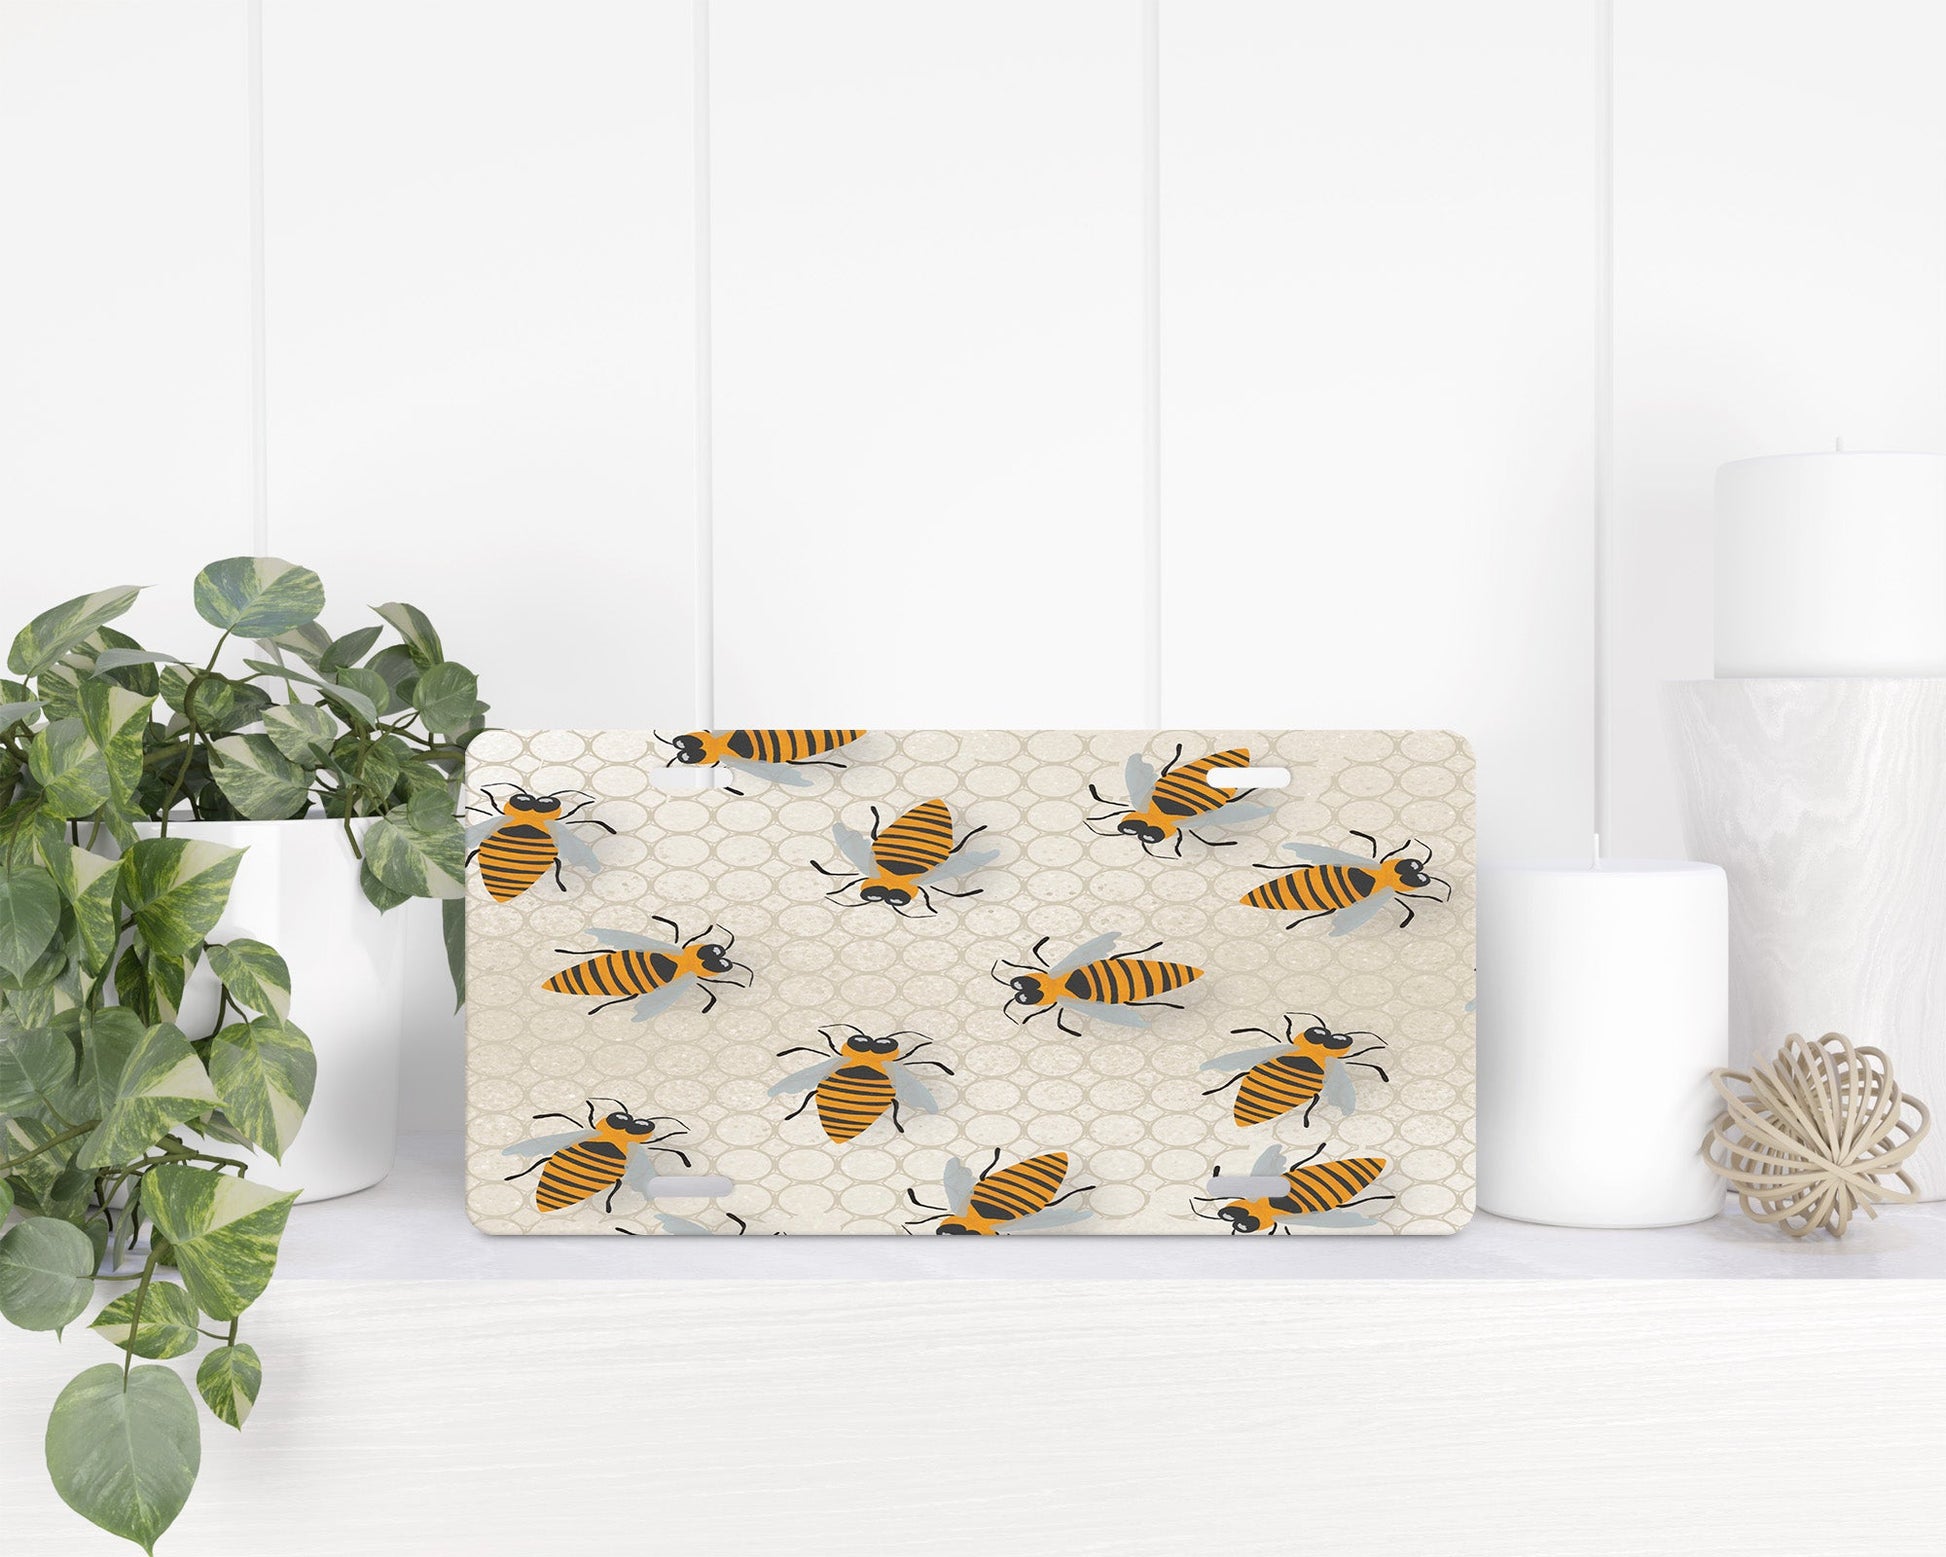 Bees|License Plate - Vehicle License Plates